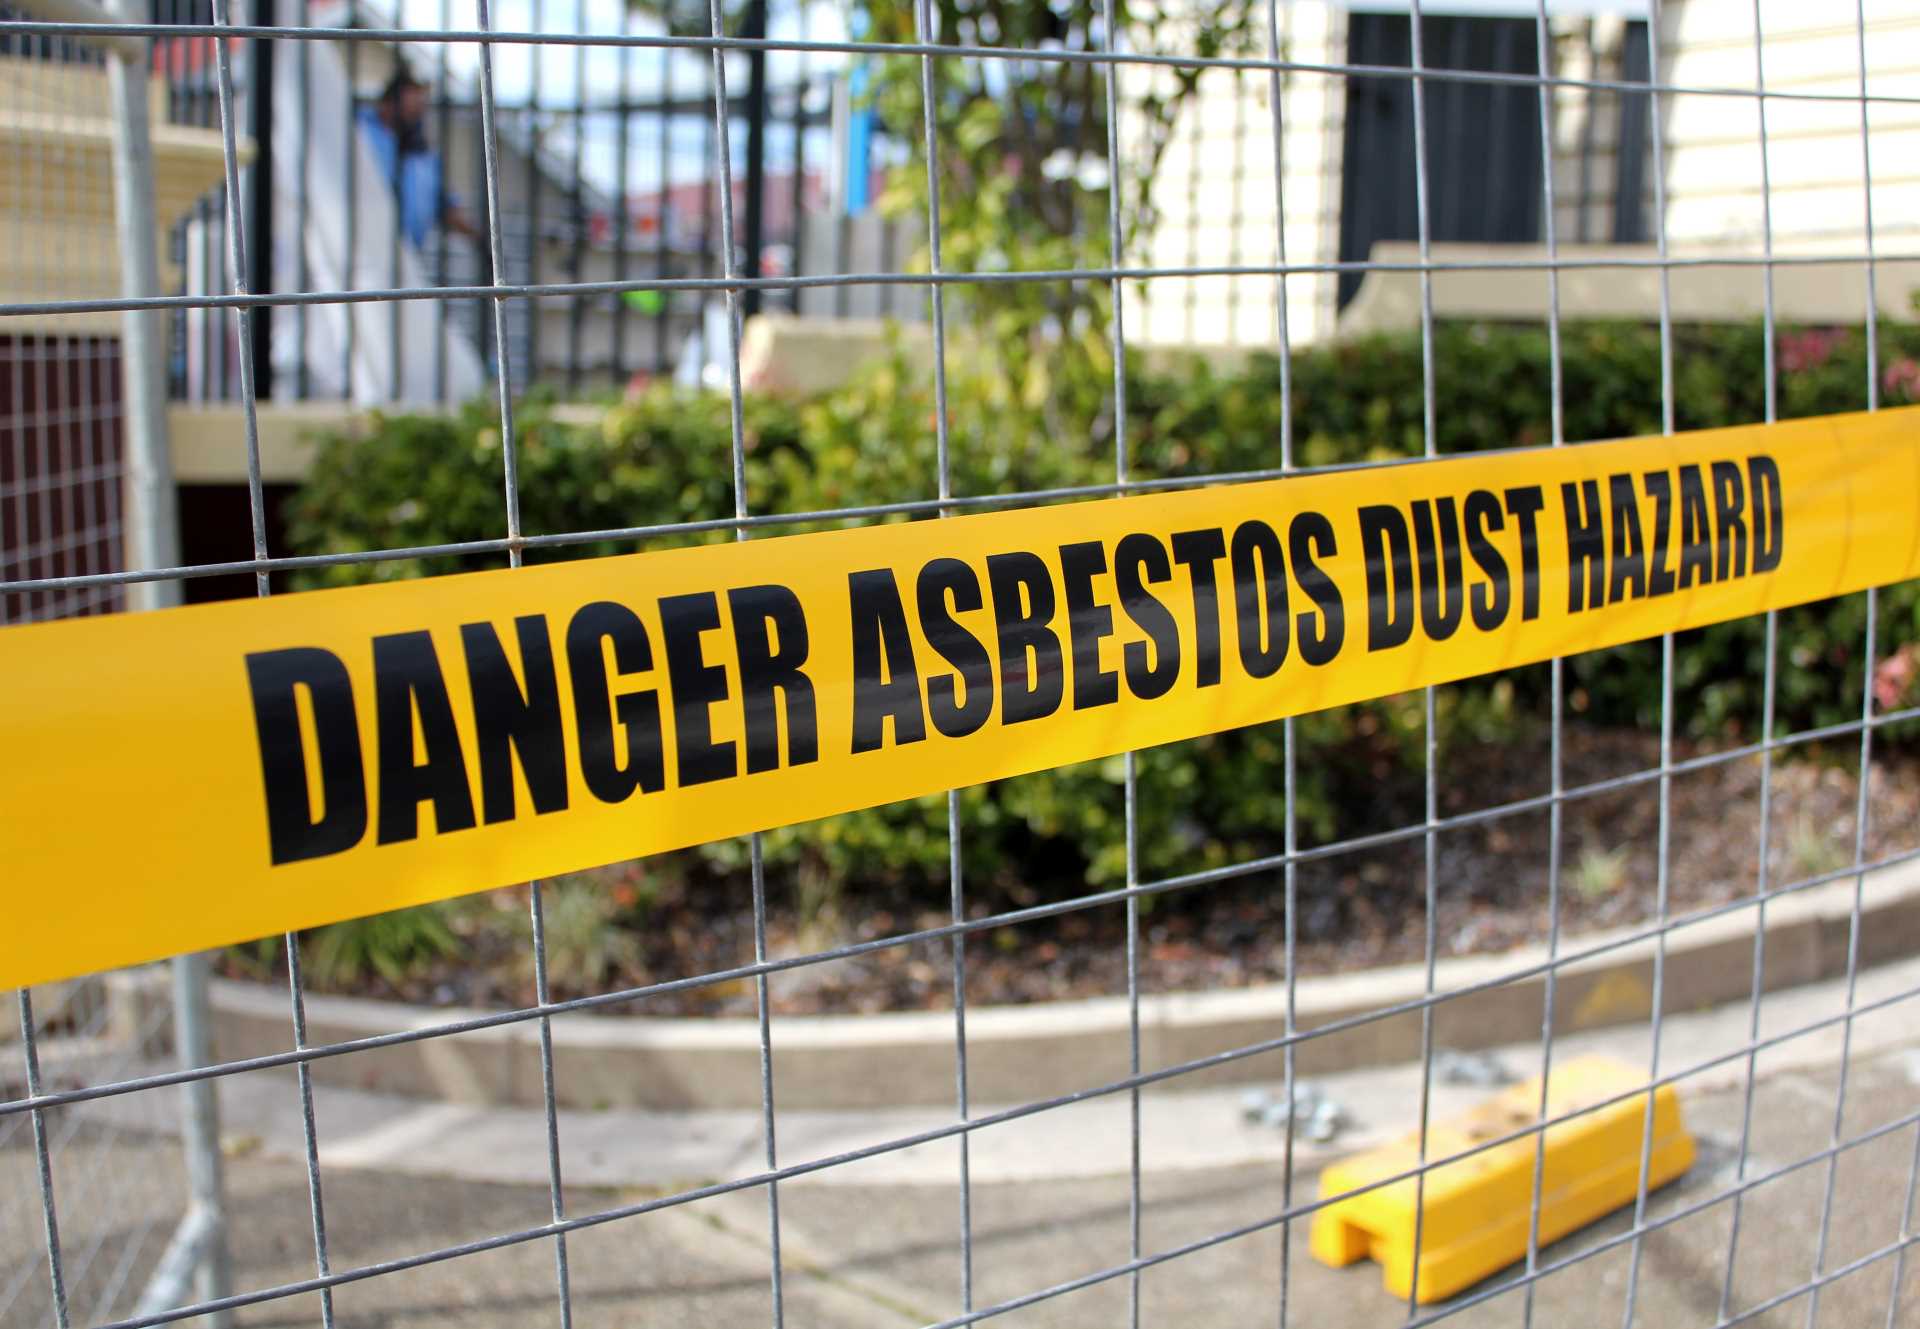 Asbestos removal warning tape across a fence | Featured Image for the Understanding the Asbestos Decontamination Process Blog by Gumdale Demolition.